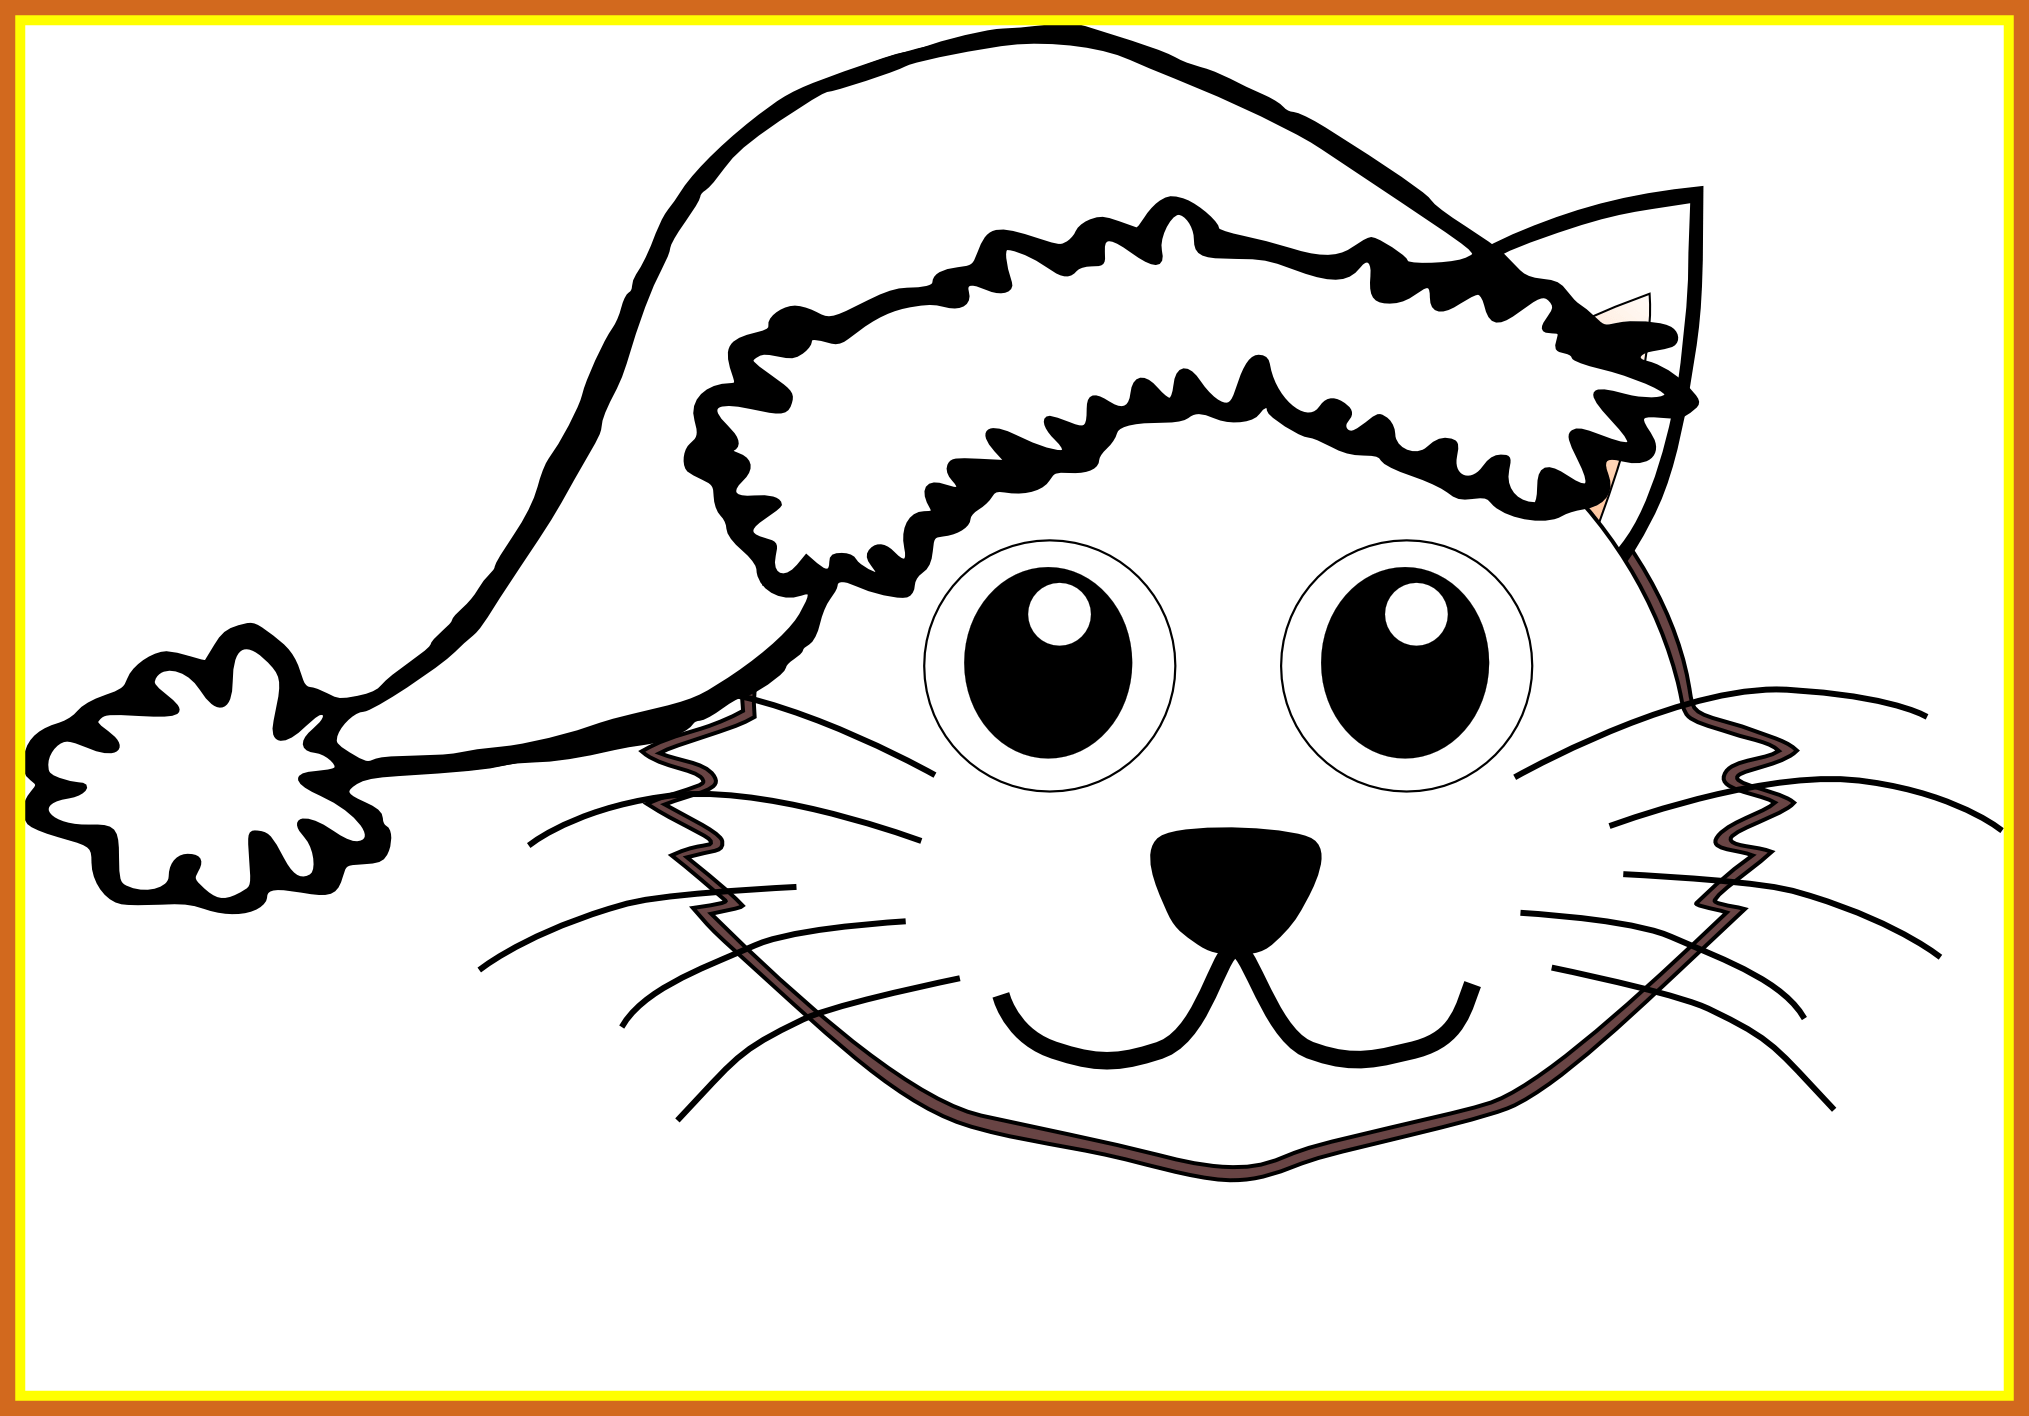 Amazing cute drawing at. Kittens clipart line art